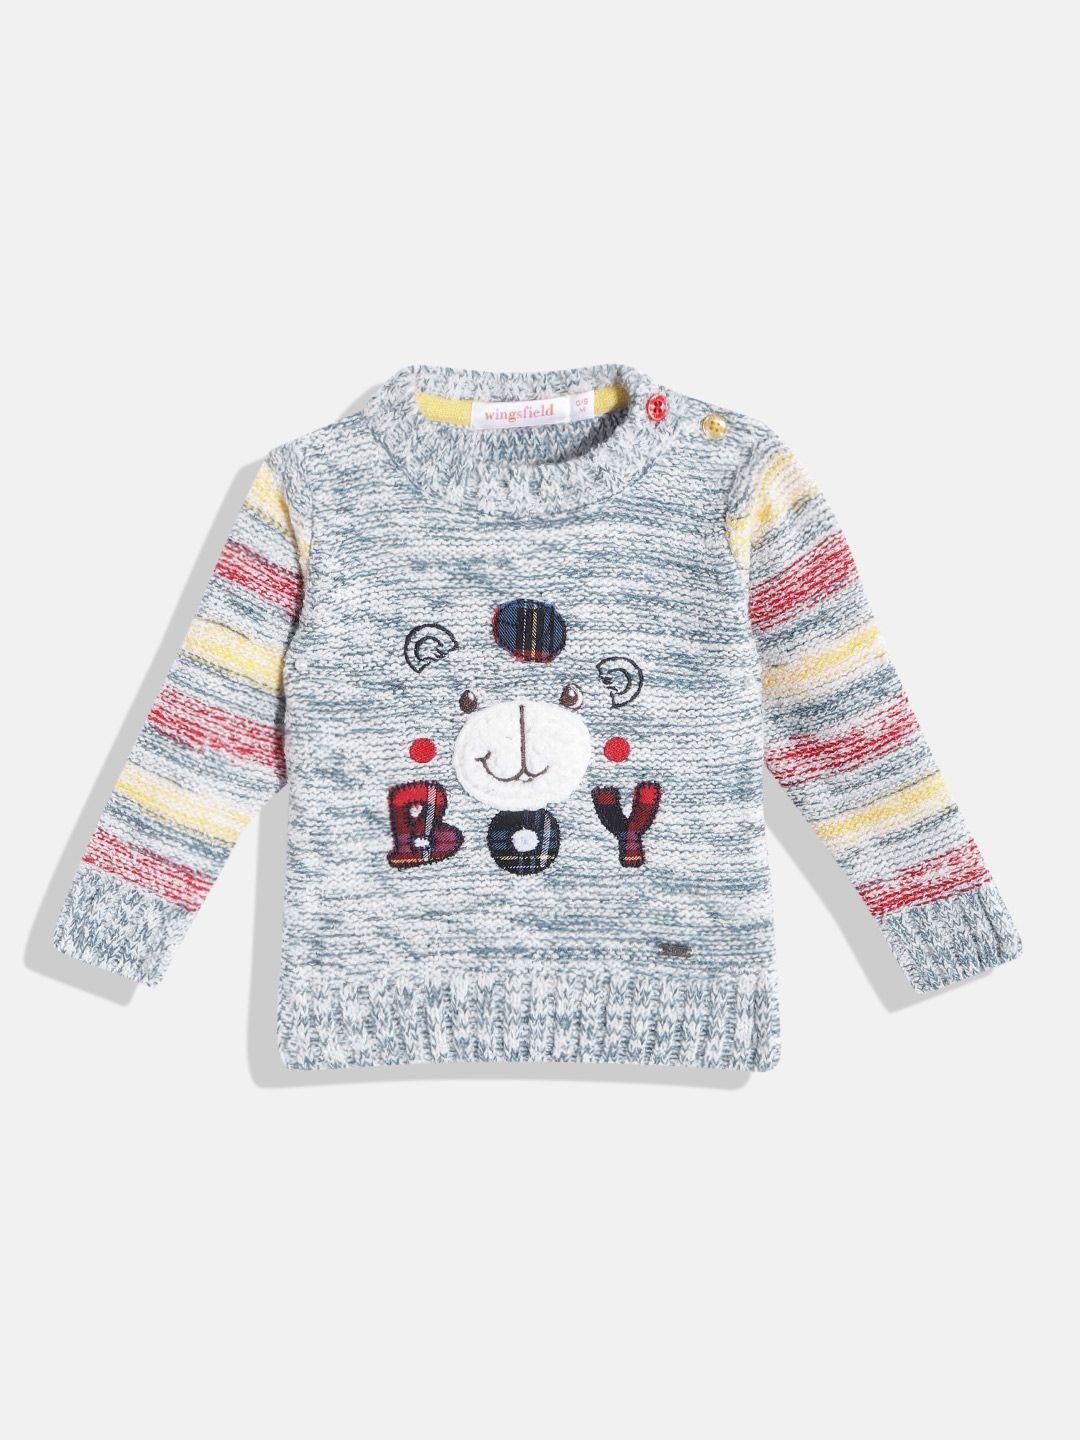 wingsfield boys blue & white printed pullover with embroidered detail